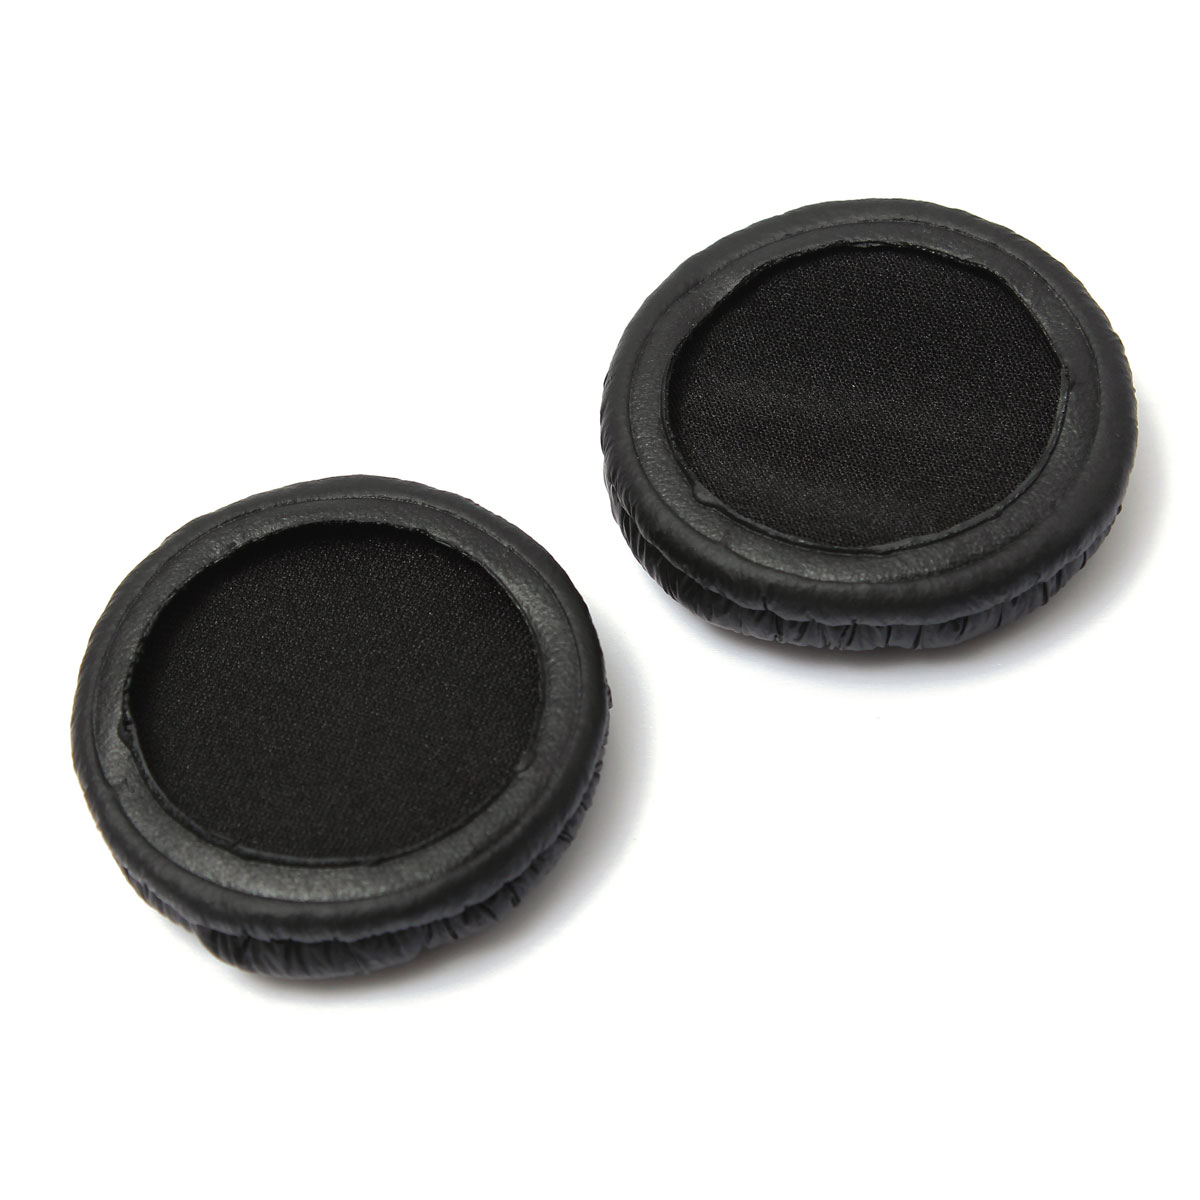 LEORY-1-Pair-For-Sennheiser-PX100-PX200-Headphone-Replacement-Ear-Pads-Cover-Headband-Cushion-1782024-11